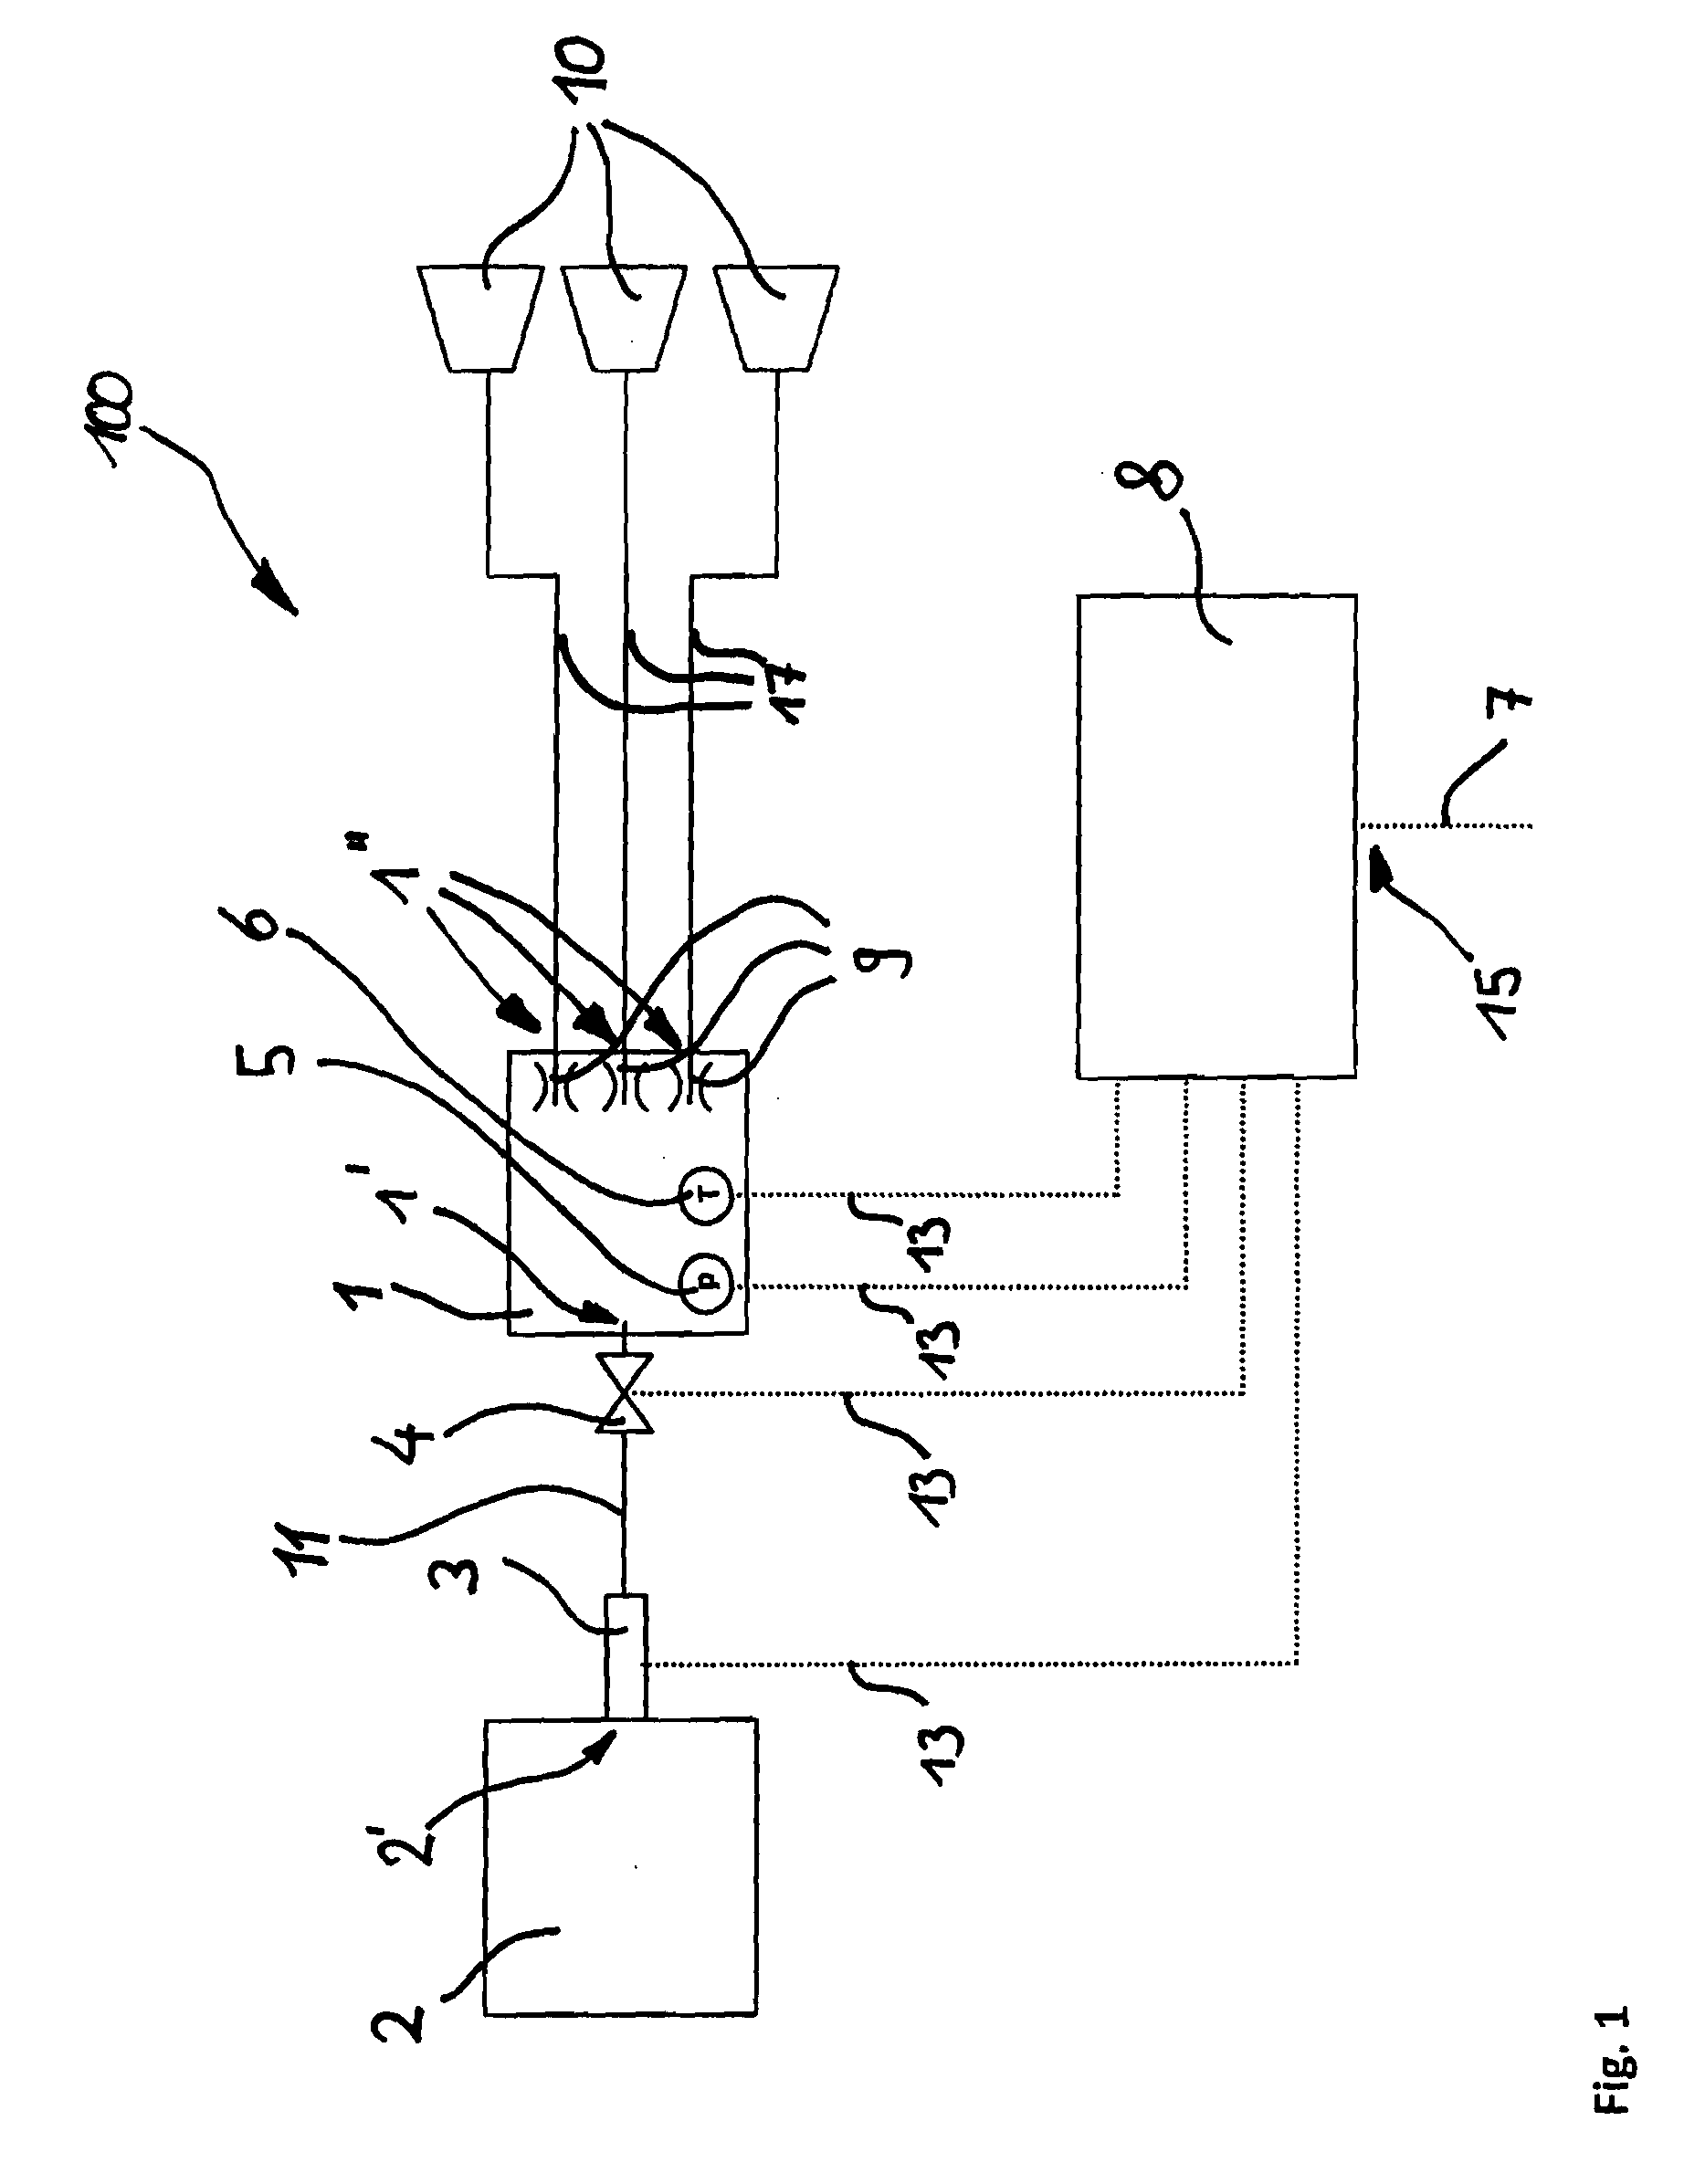 Oxygen breathing device with mass flow control